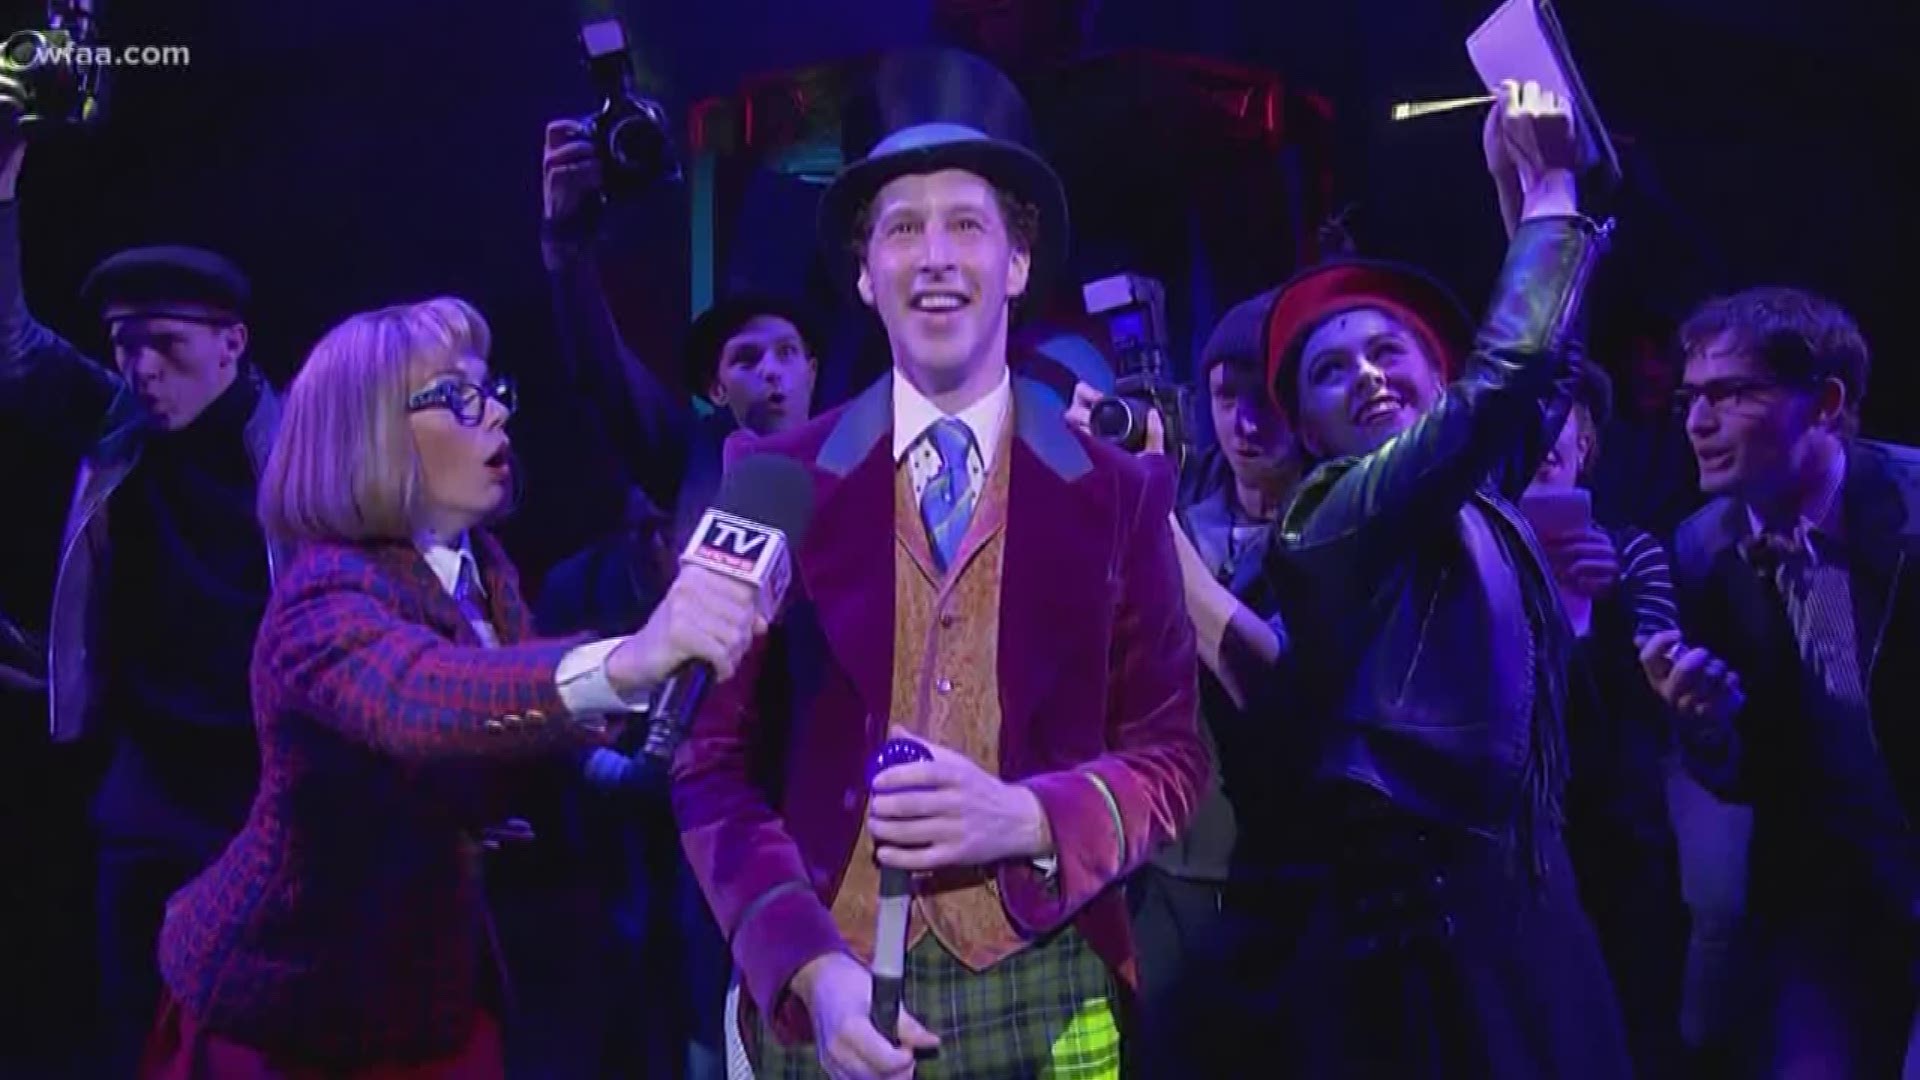 "Charlie and the Chocolate Factory" is ready to delight North Texas audiences. One of the stars shares secrets from the sweet musical.